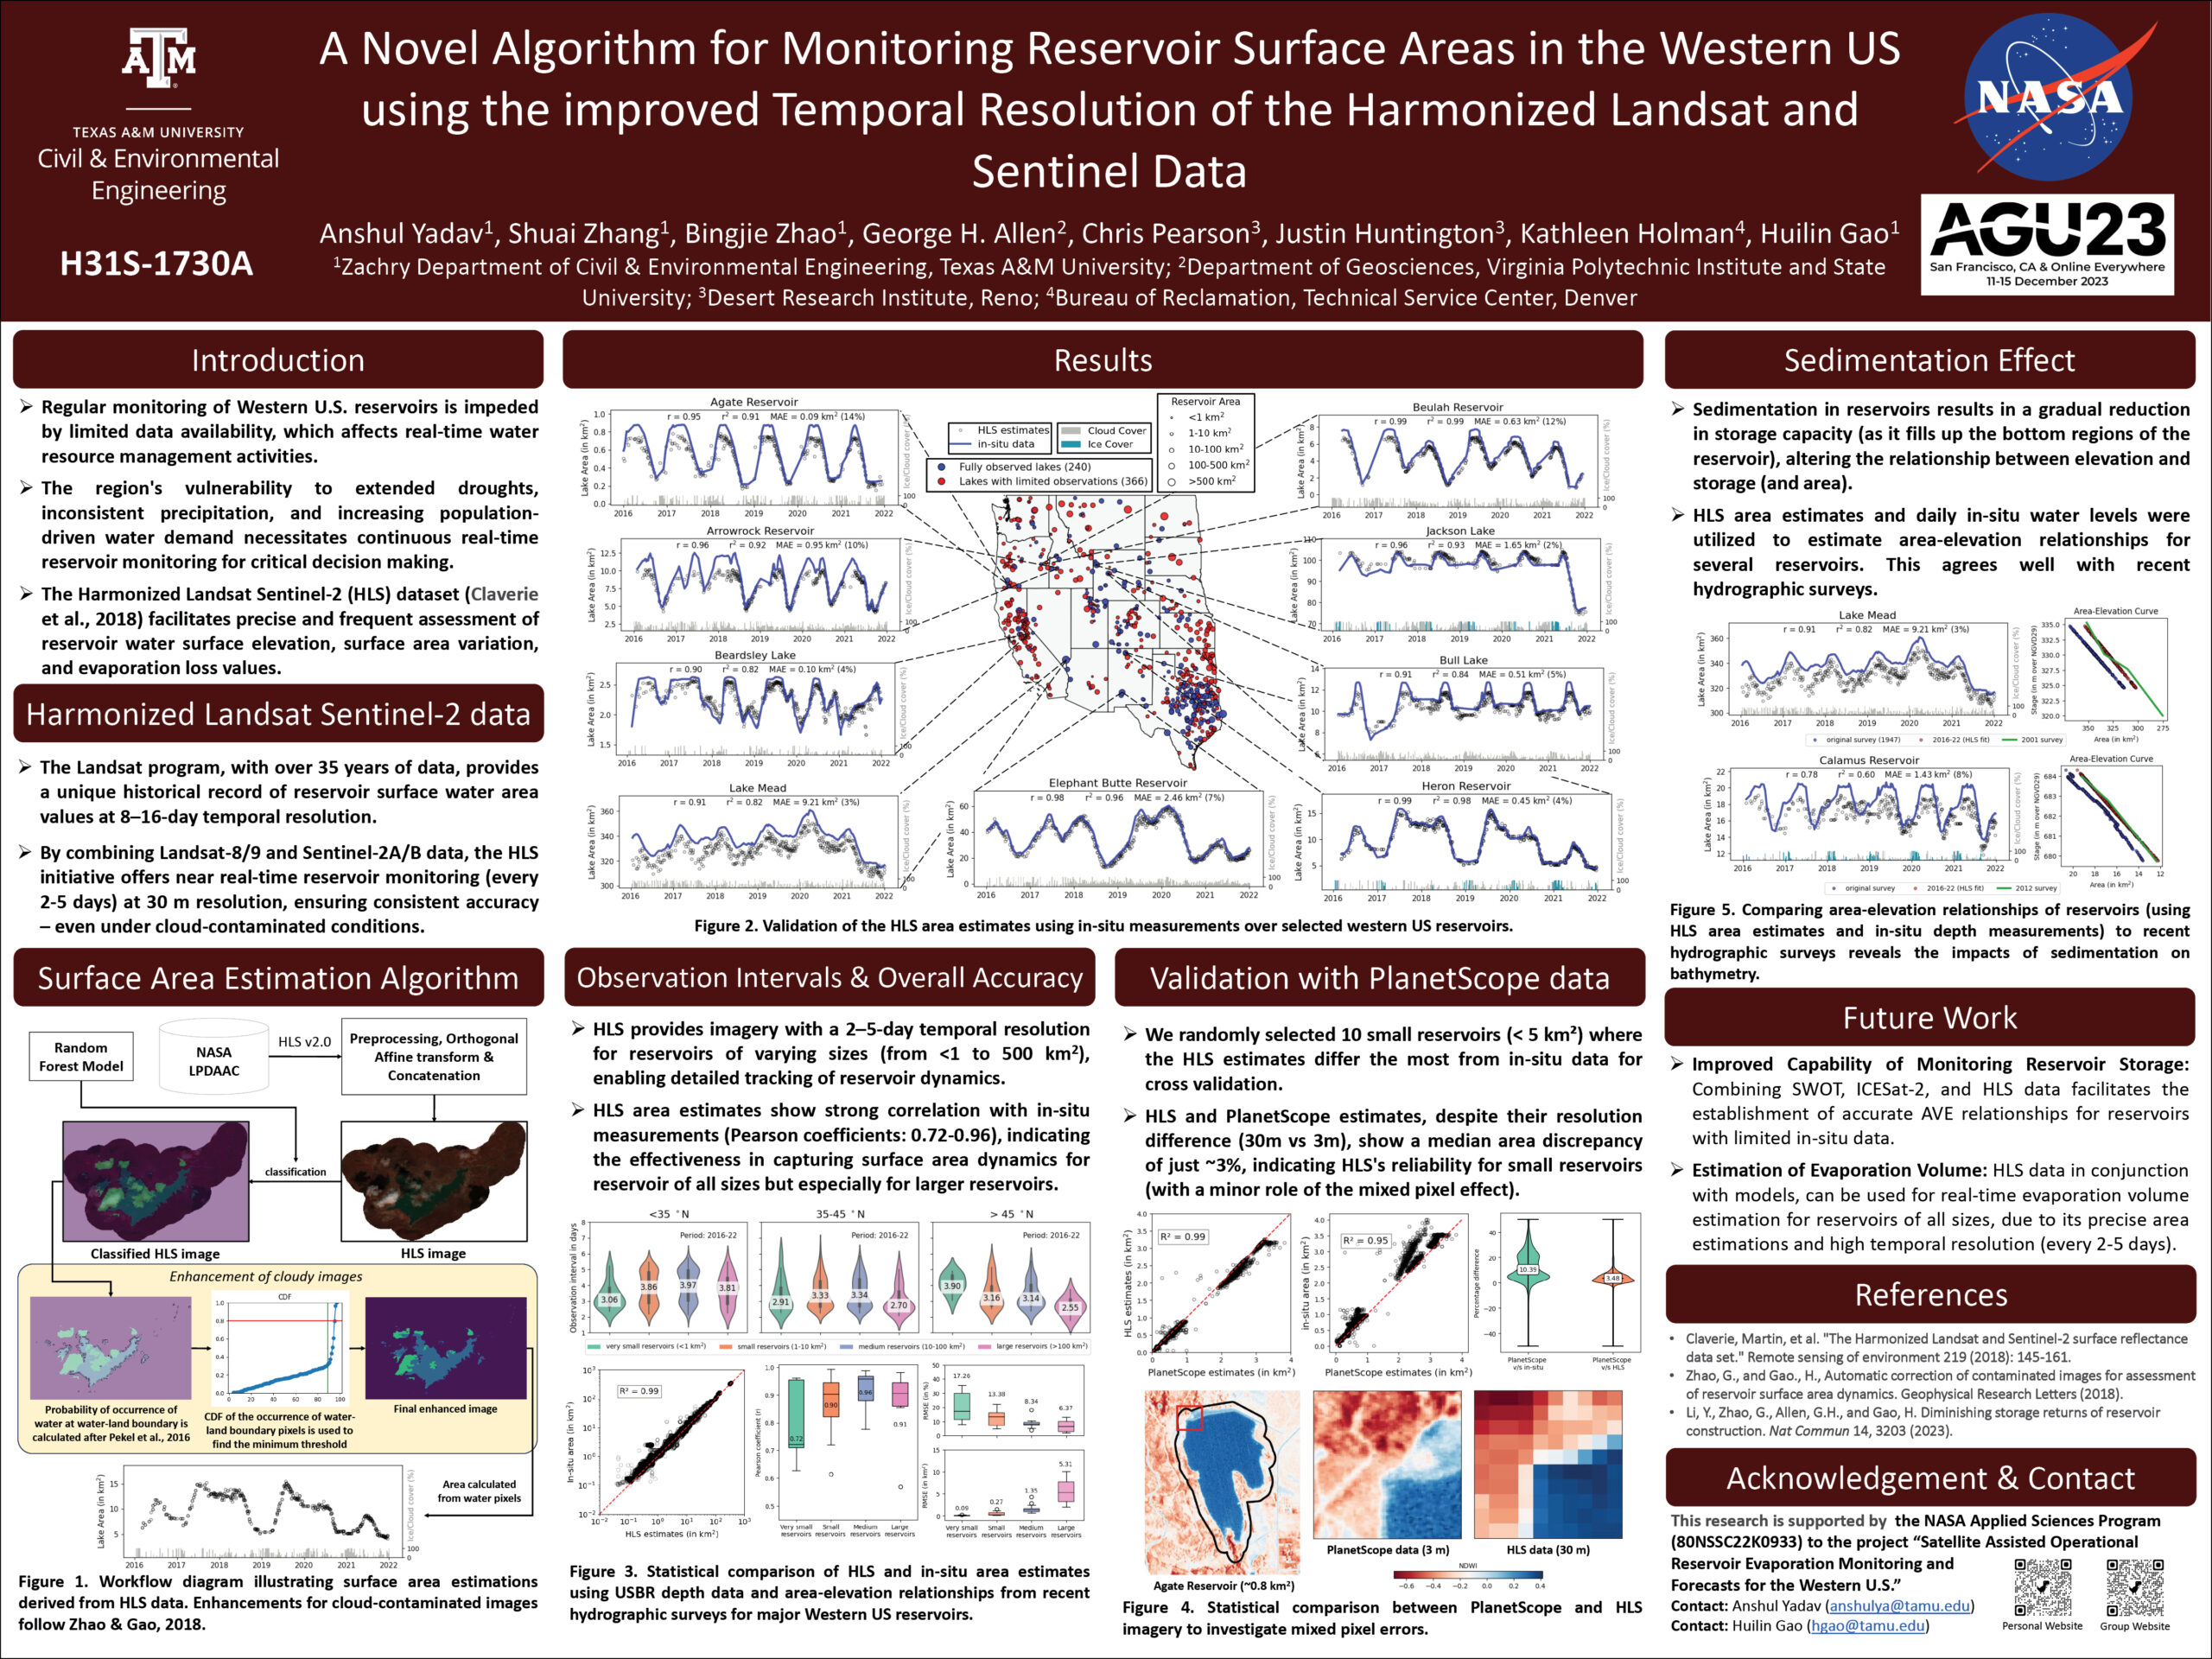 AGU23 Poster by Anshul Yadav titled A Novel Algorithm for Monitoring Reservoir Surface Area in the Western US using the improved Temporal Resolution of the Harmonized Landsat and Sentinel Data